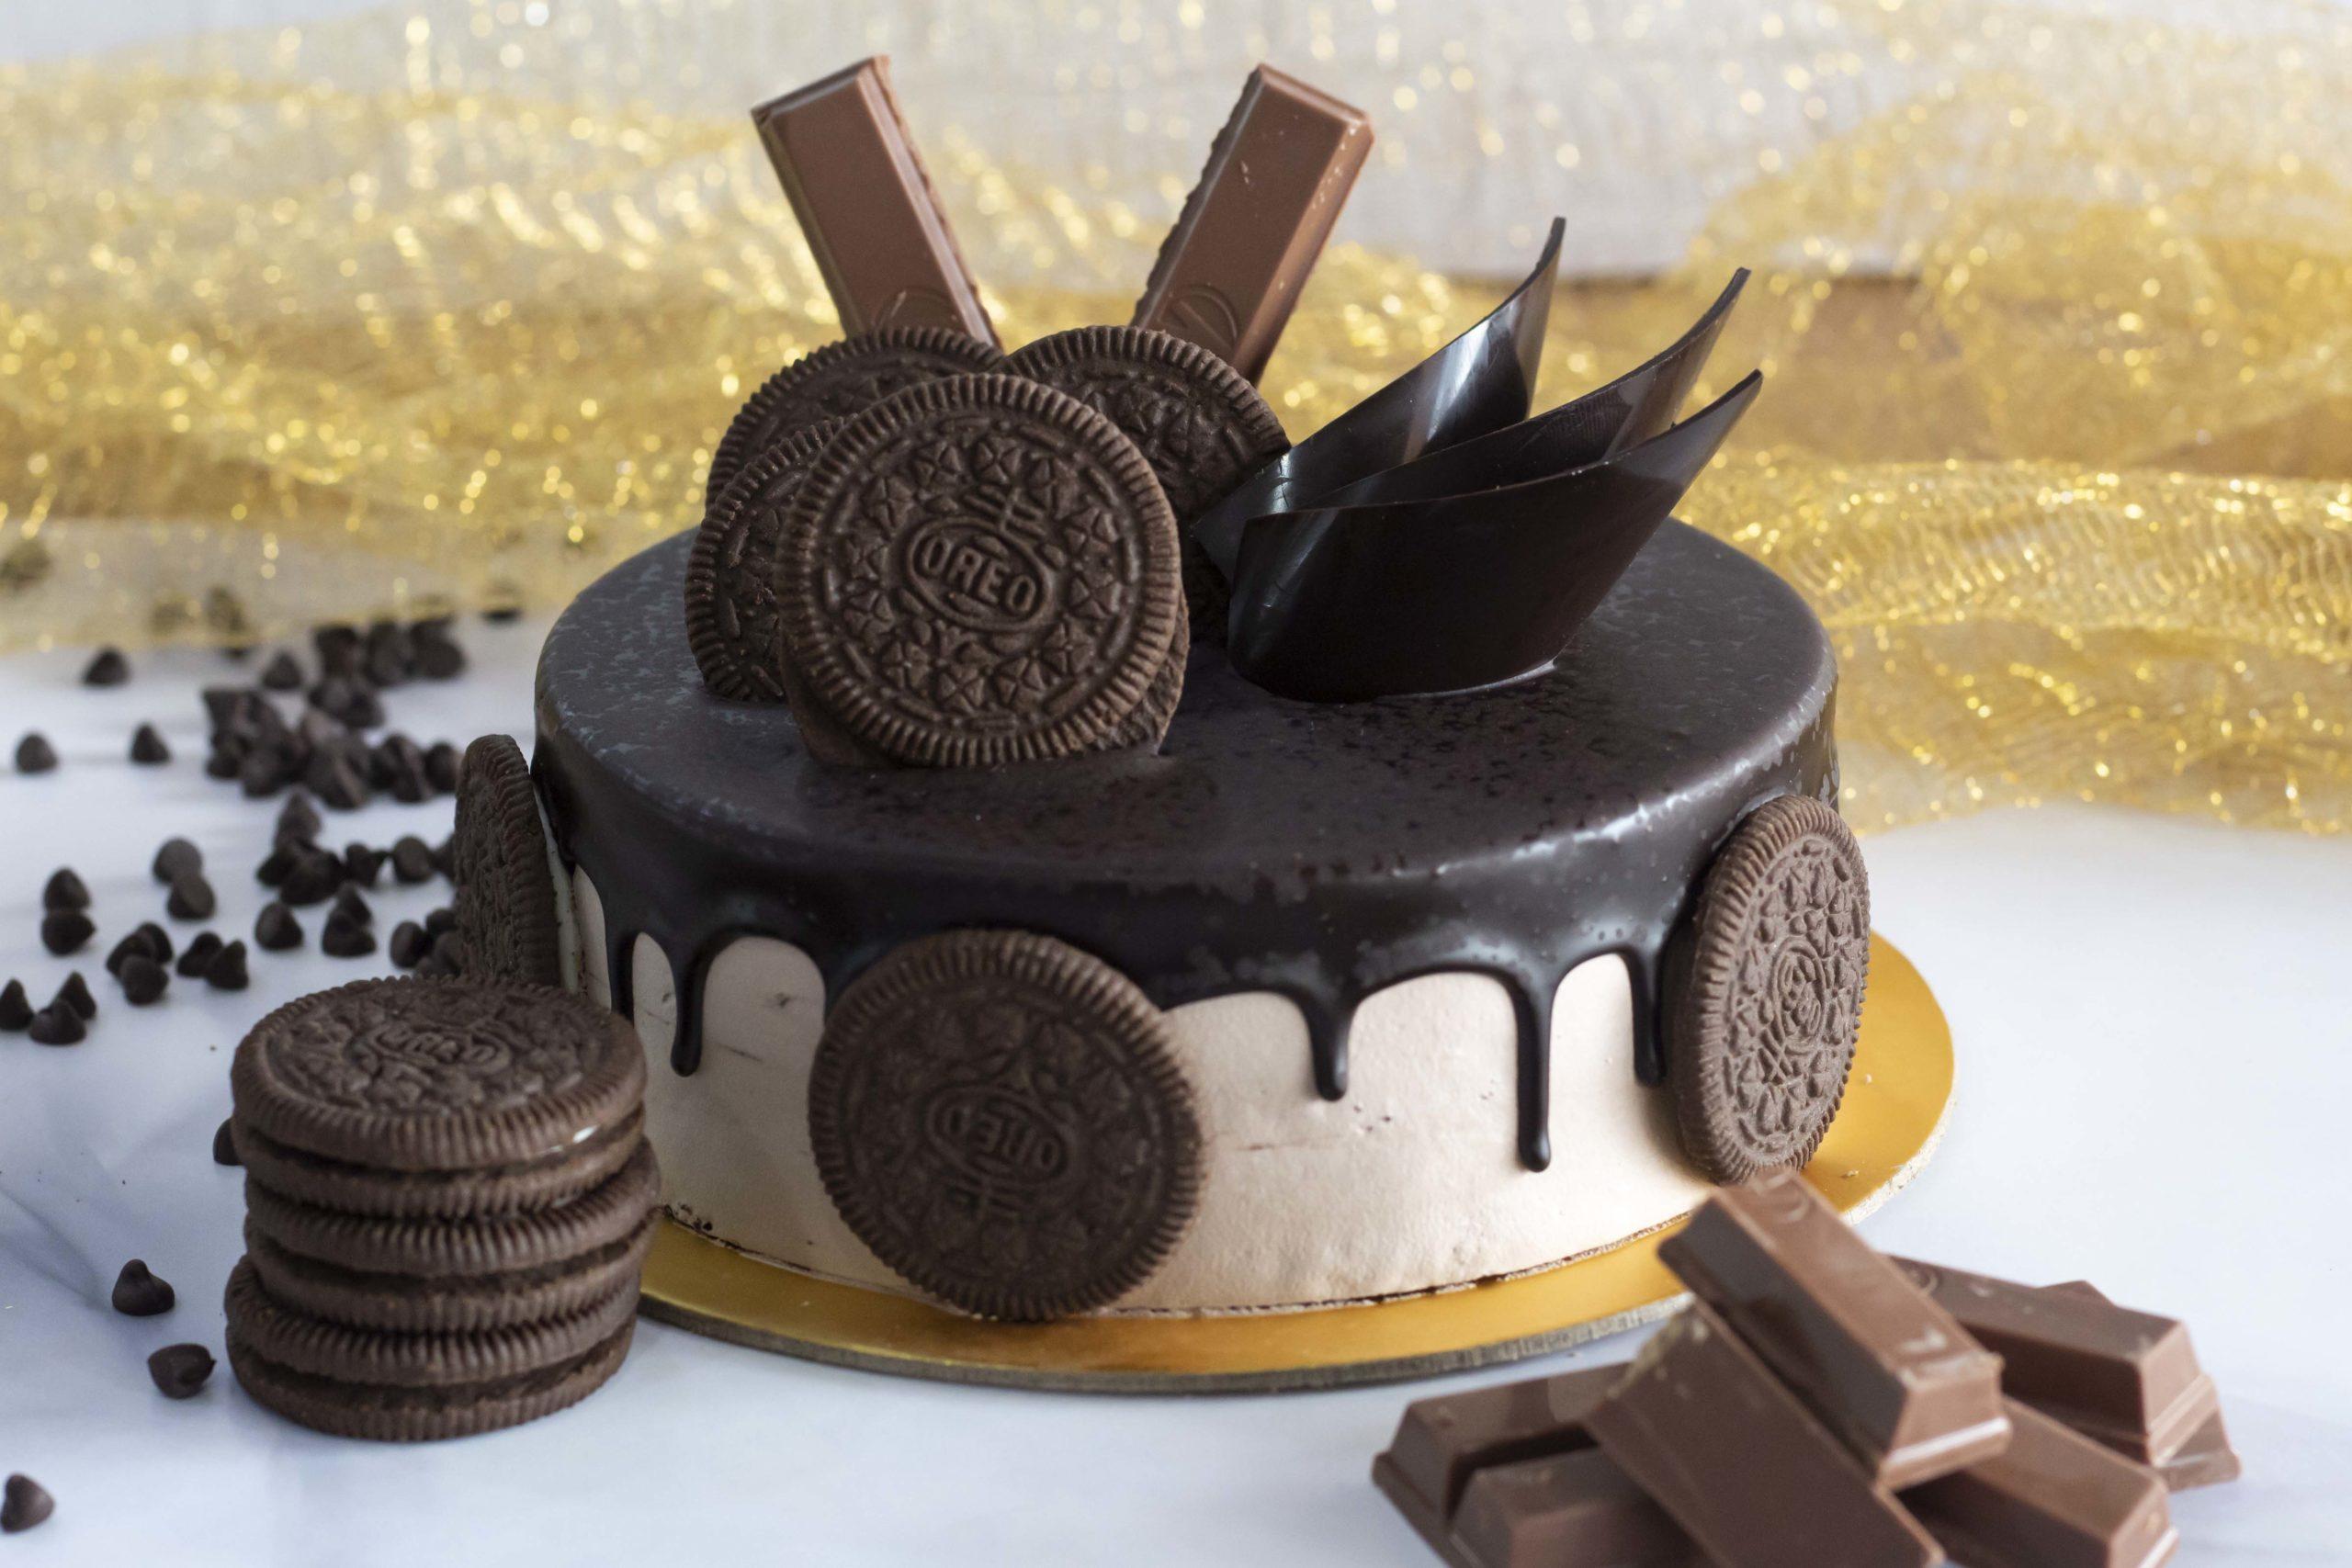 How to Make a Kit Kat Cake: Step-by-Step Recipe with Images